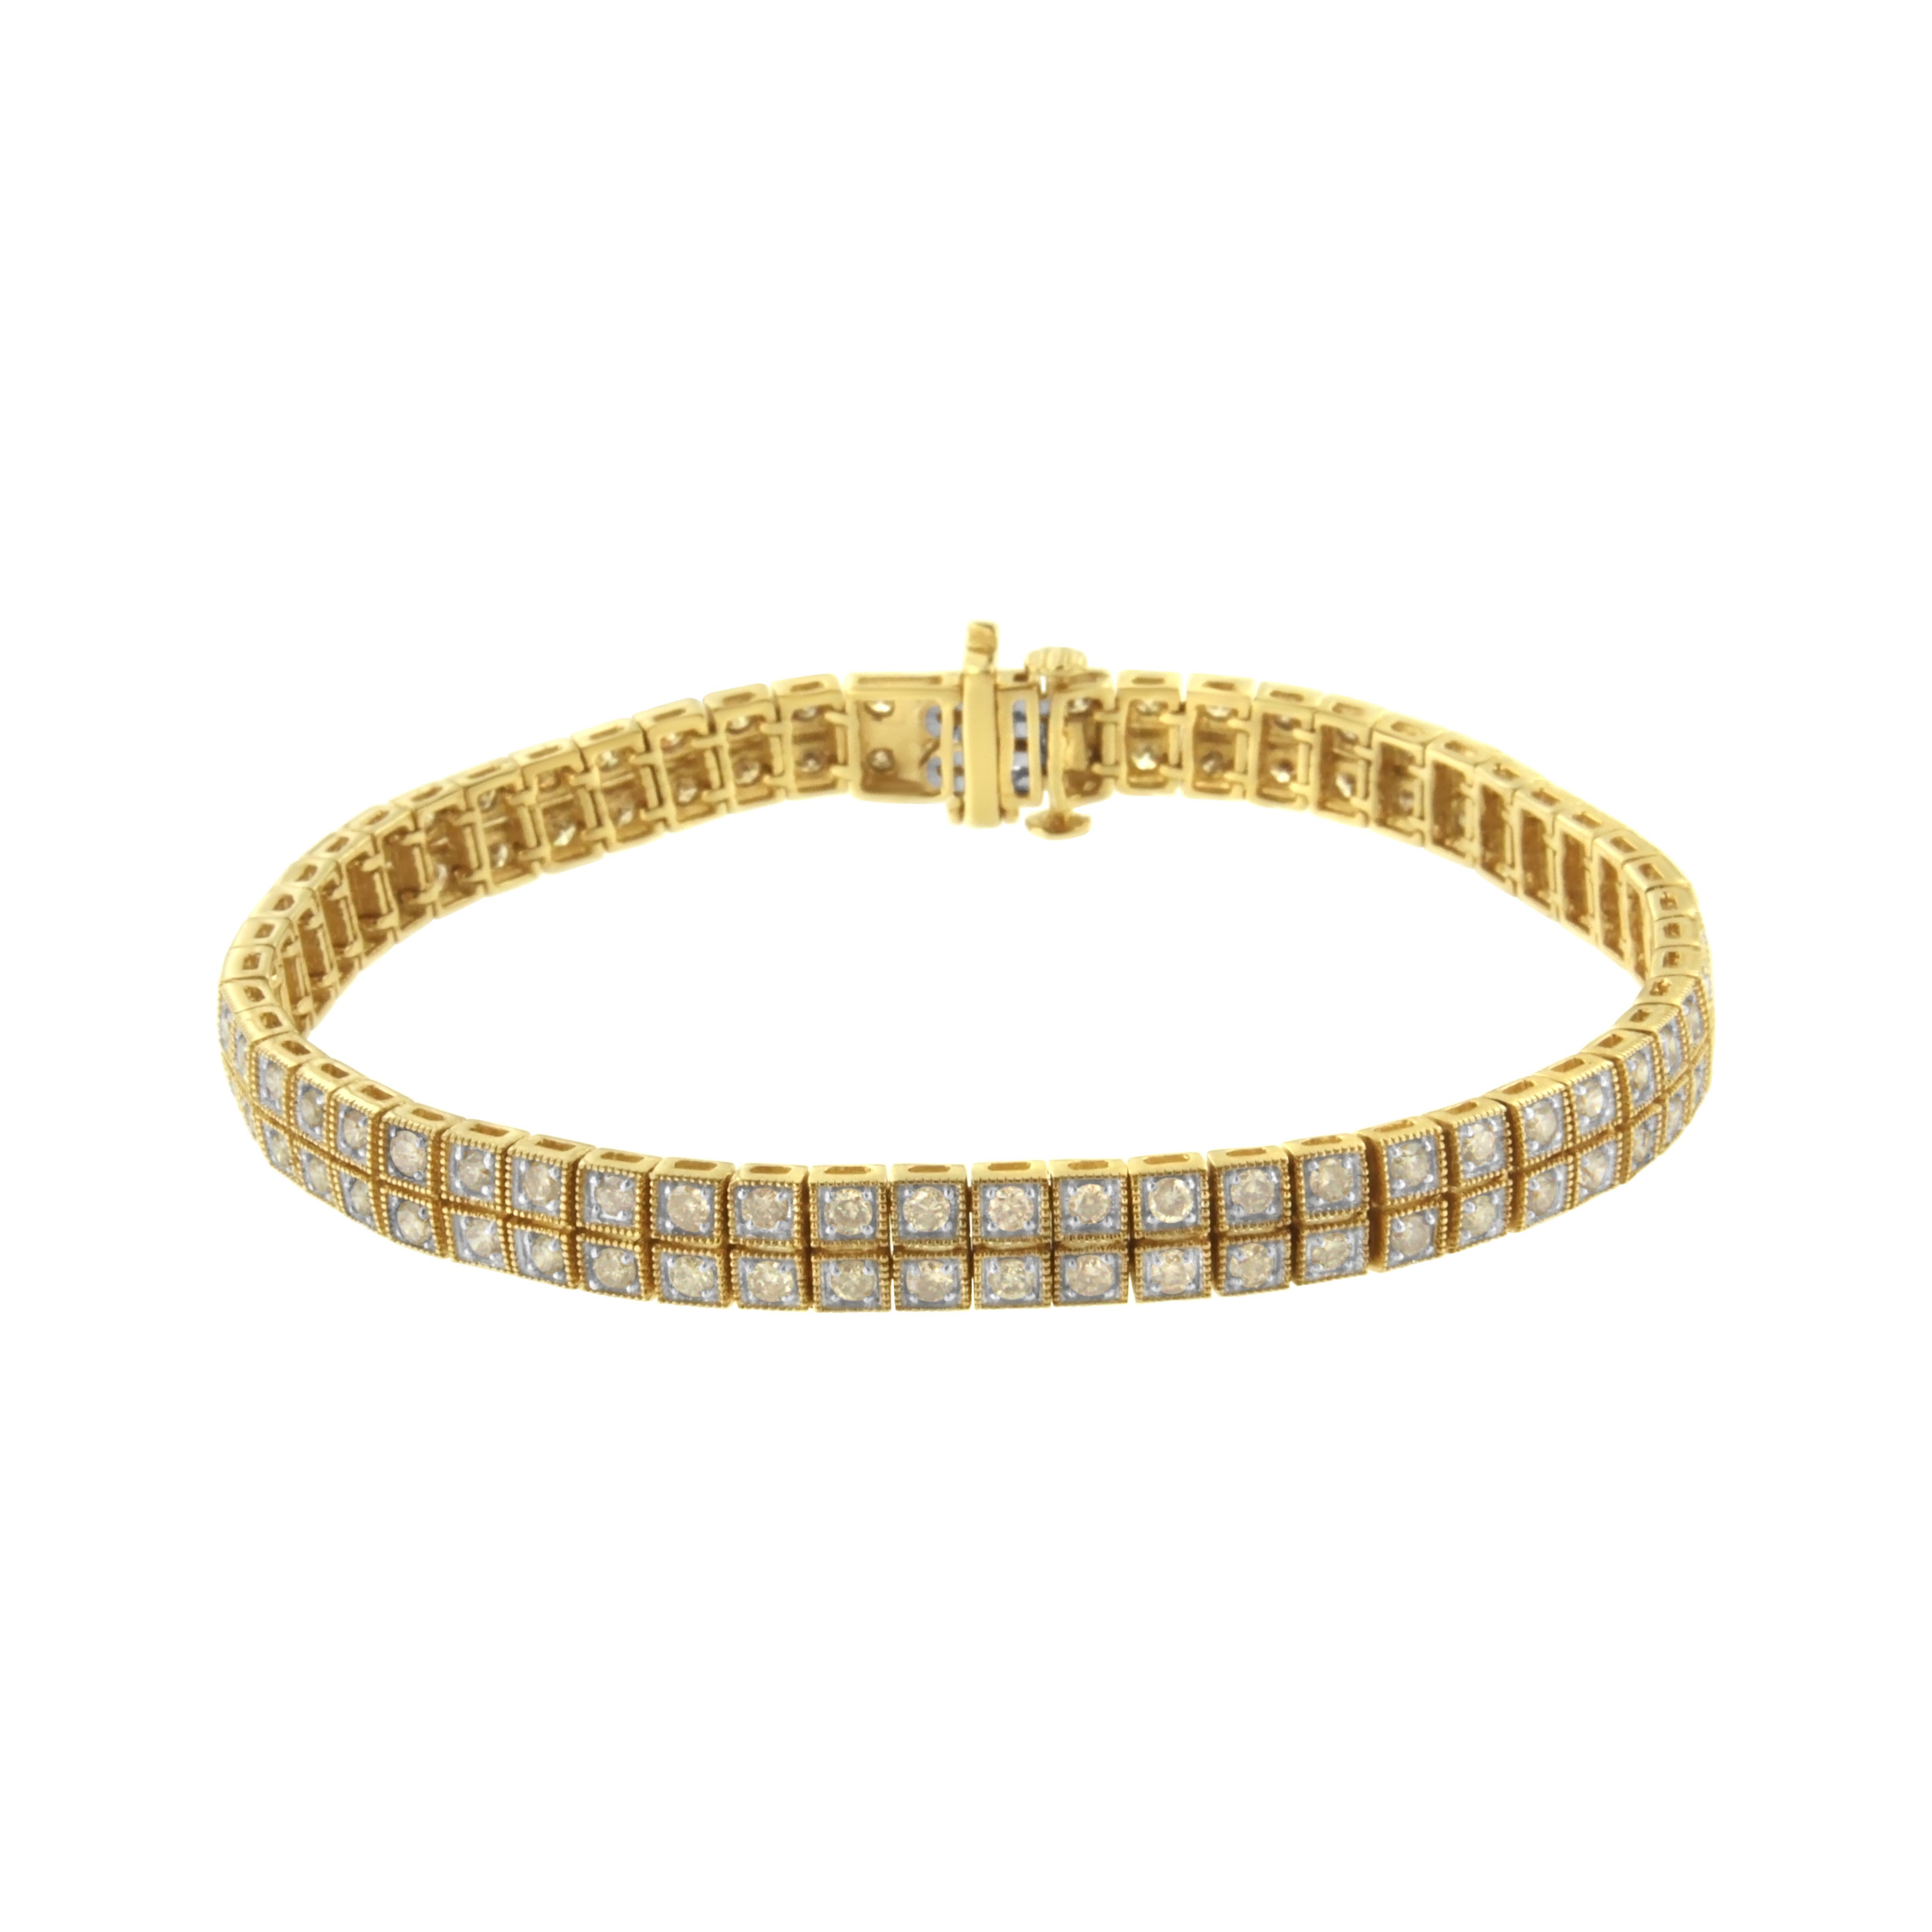 This classic twist on the diamond tennis bracelet is meant to go with you everywhere. The always-in-fashion tennis bracelet presents 112 round-cut, natural, sparkling diamonds set in warm 14k Yellow Gold Plated Sterling Silver with decorative